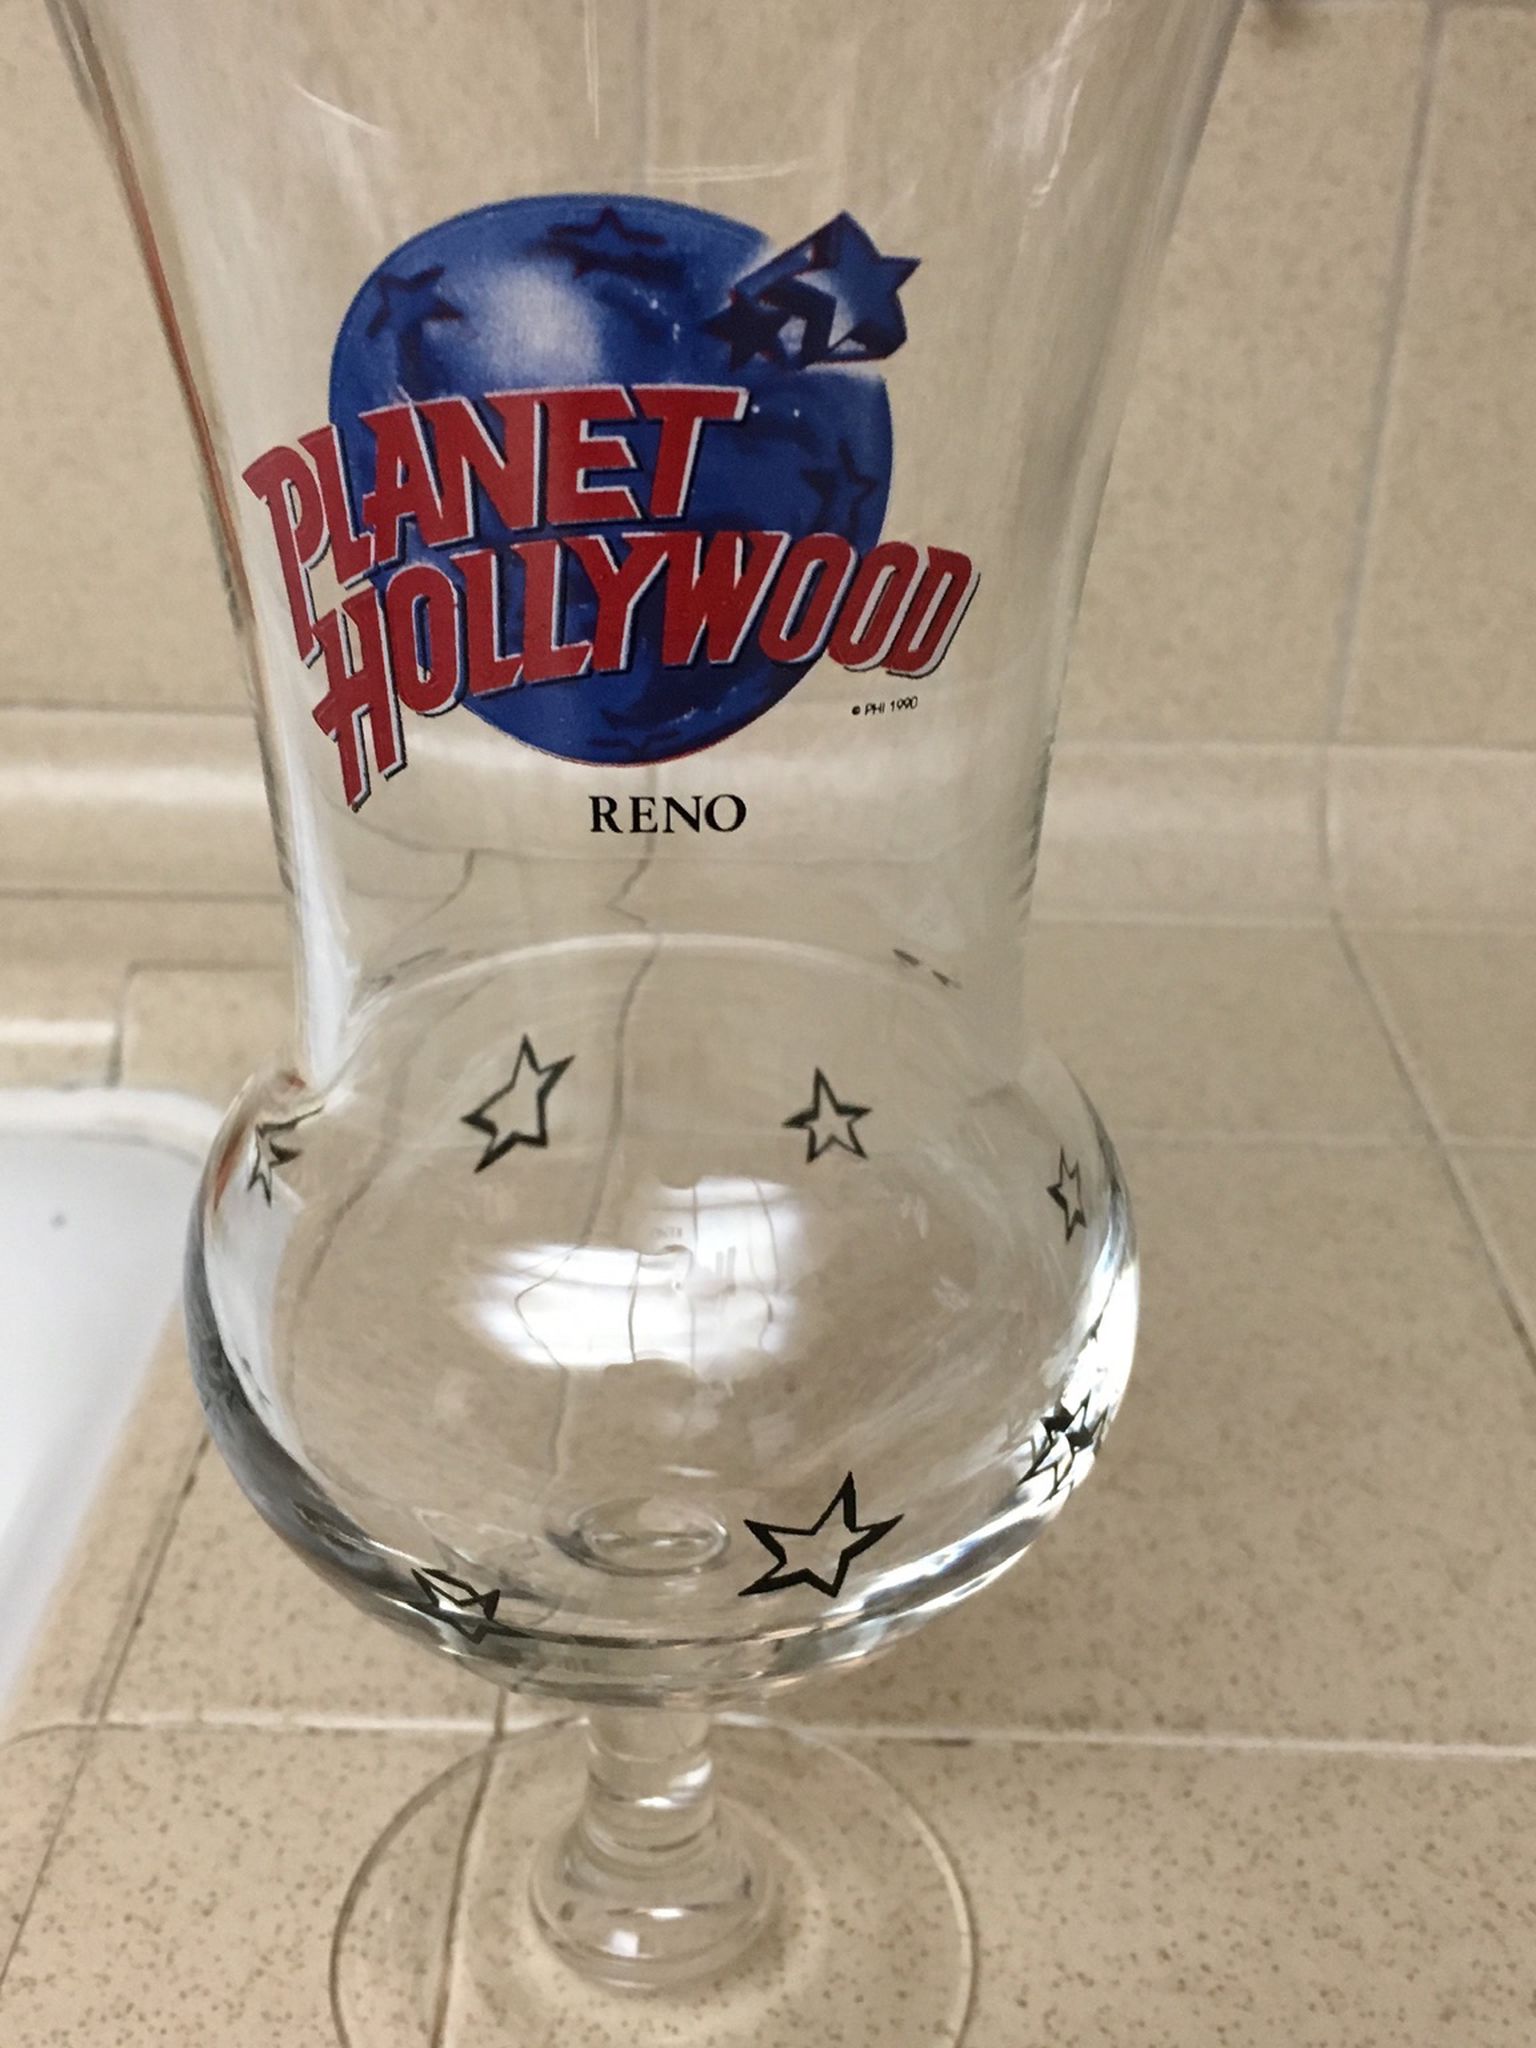 Cocktail Glass From Planet Hollywood From The 70’s